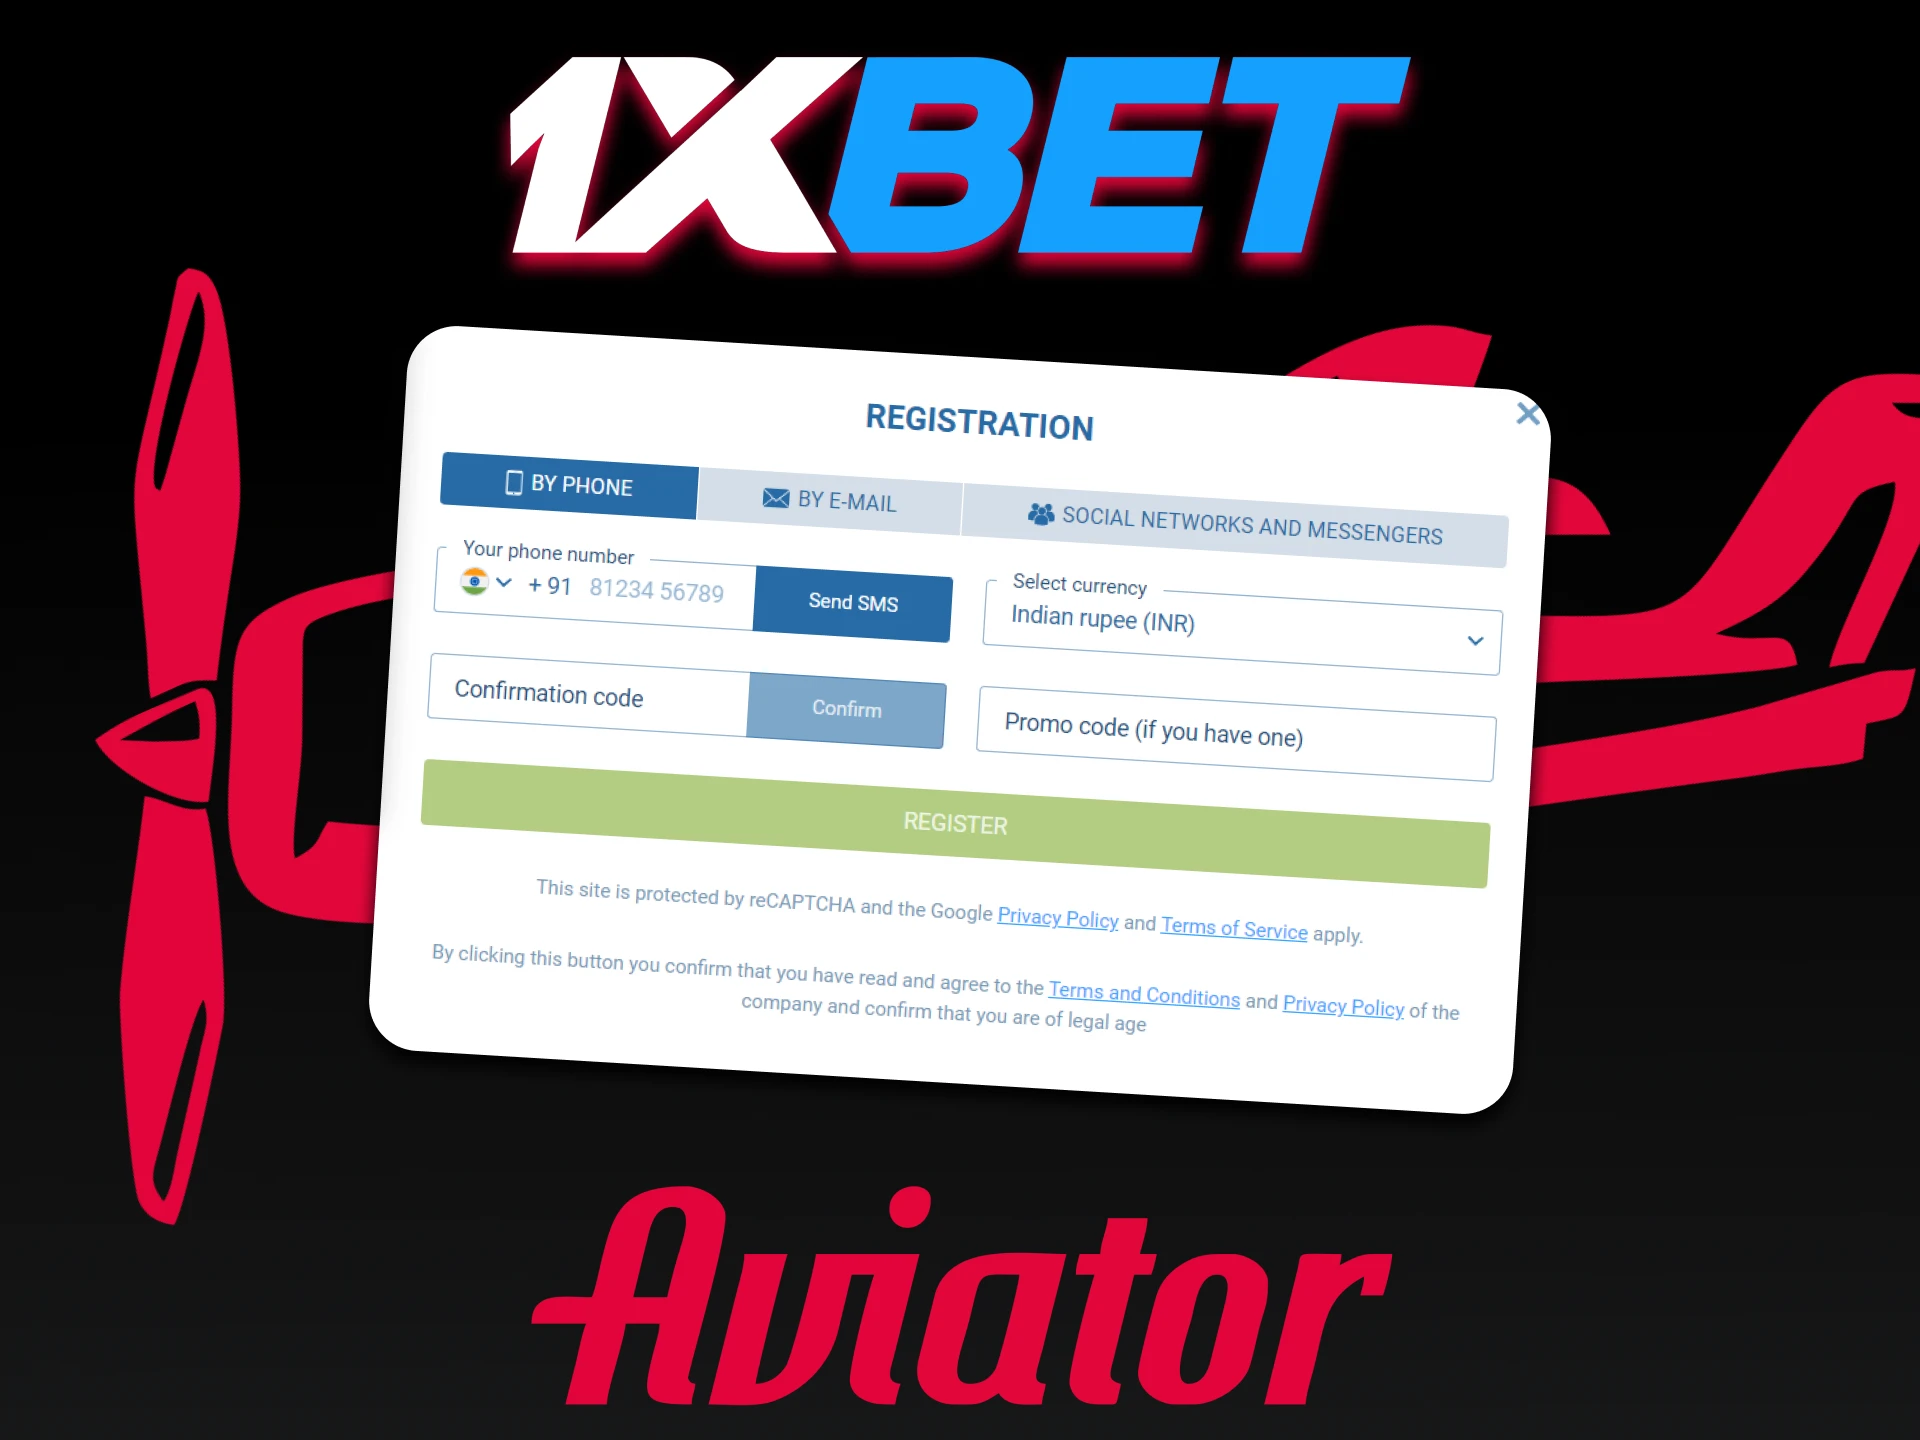 Go through the registration process at 1xbet to play Aviator.